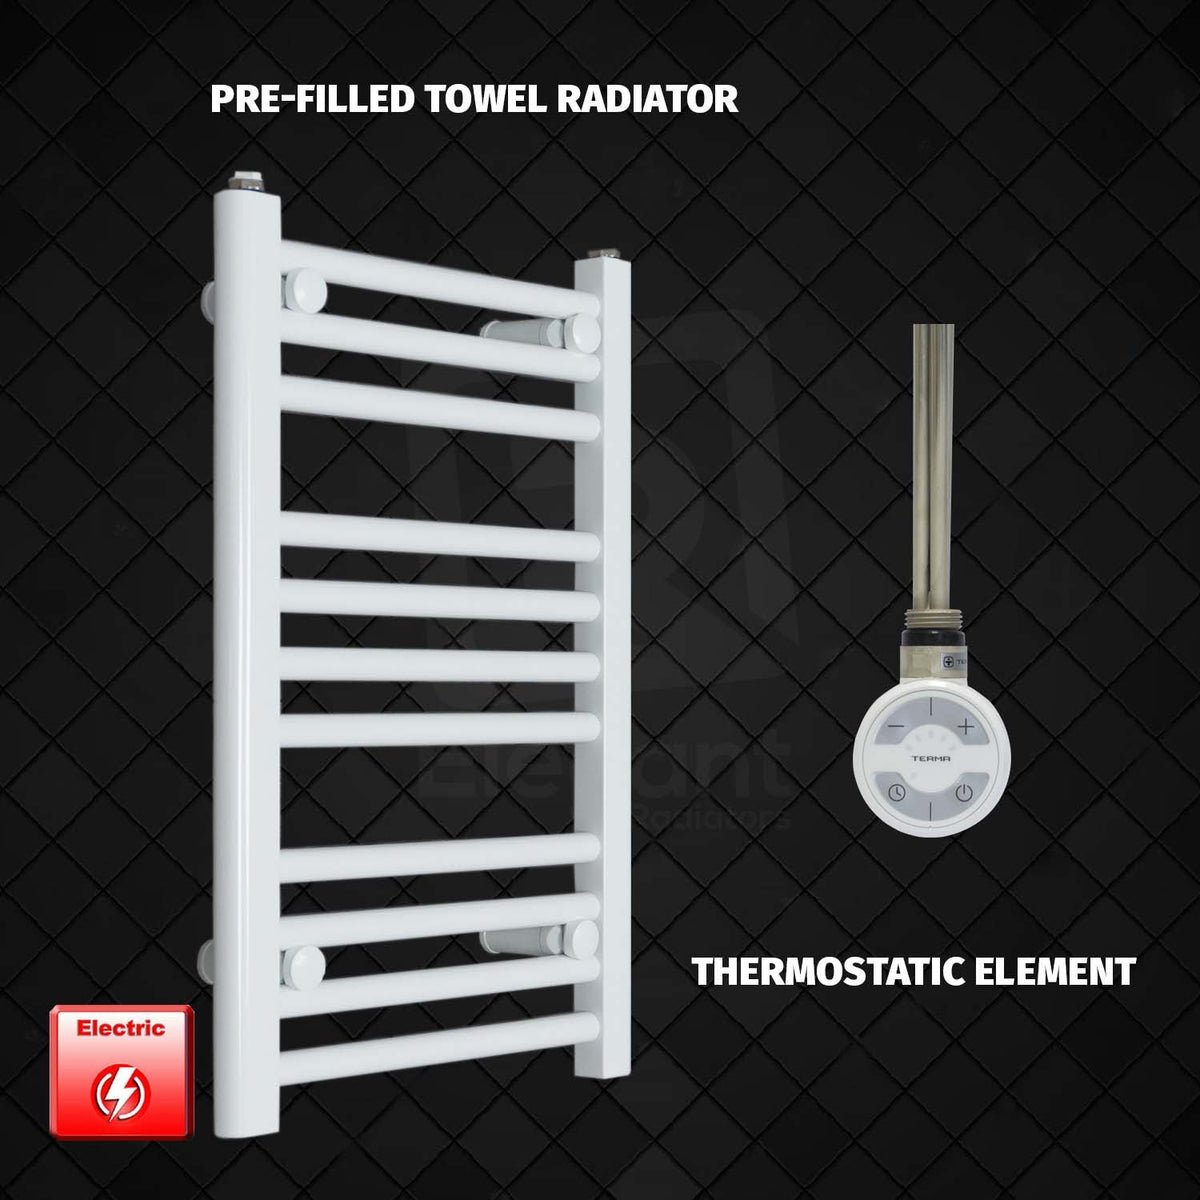 600 mm High 450 mm Wide Pre-Filled Electric Heated Towel Radiator White HTR Thermostatic element moa no timer